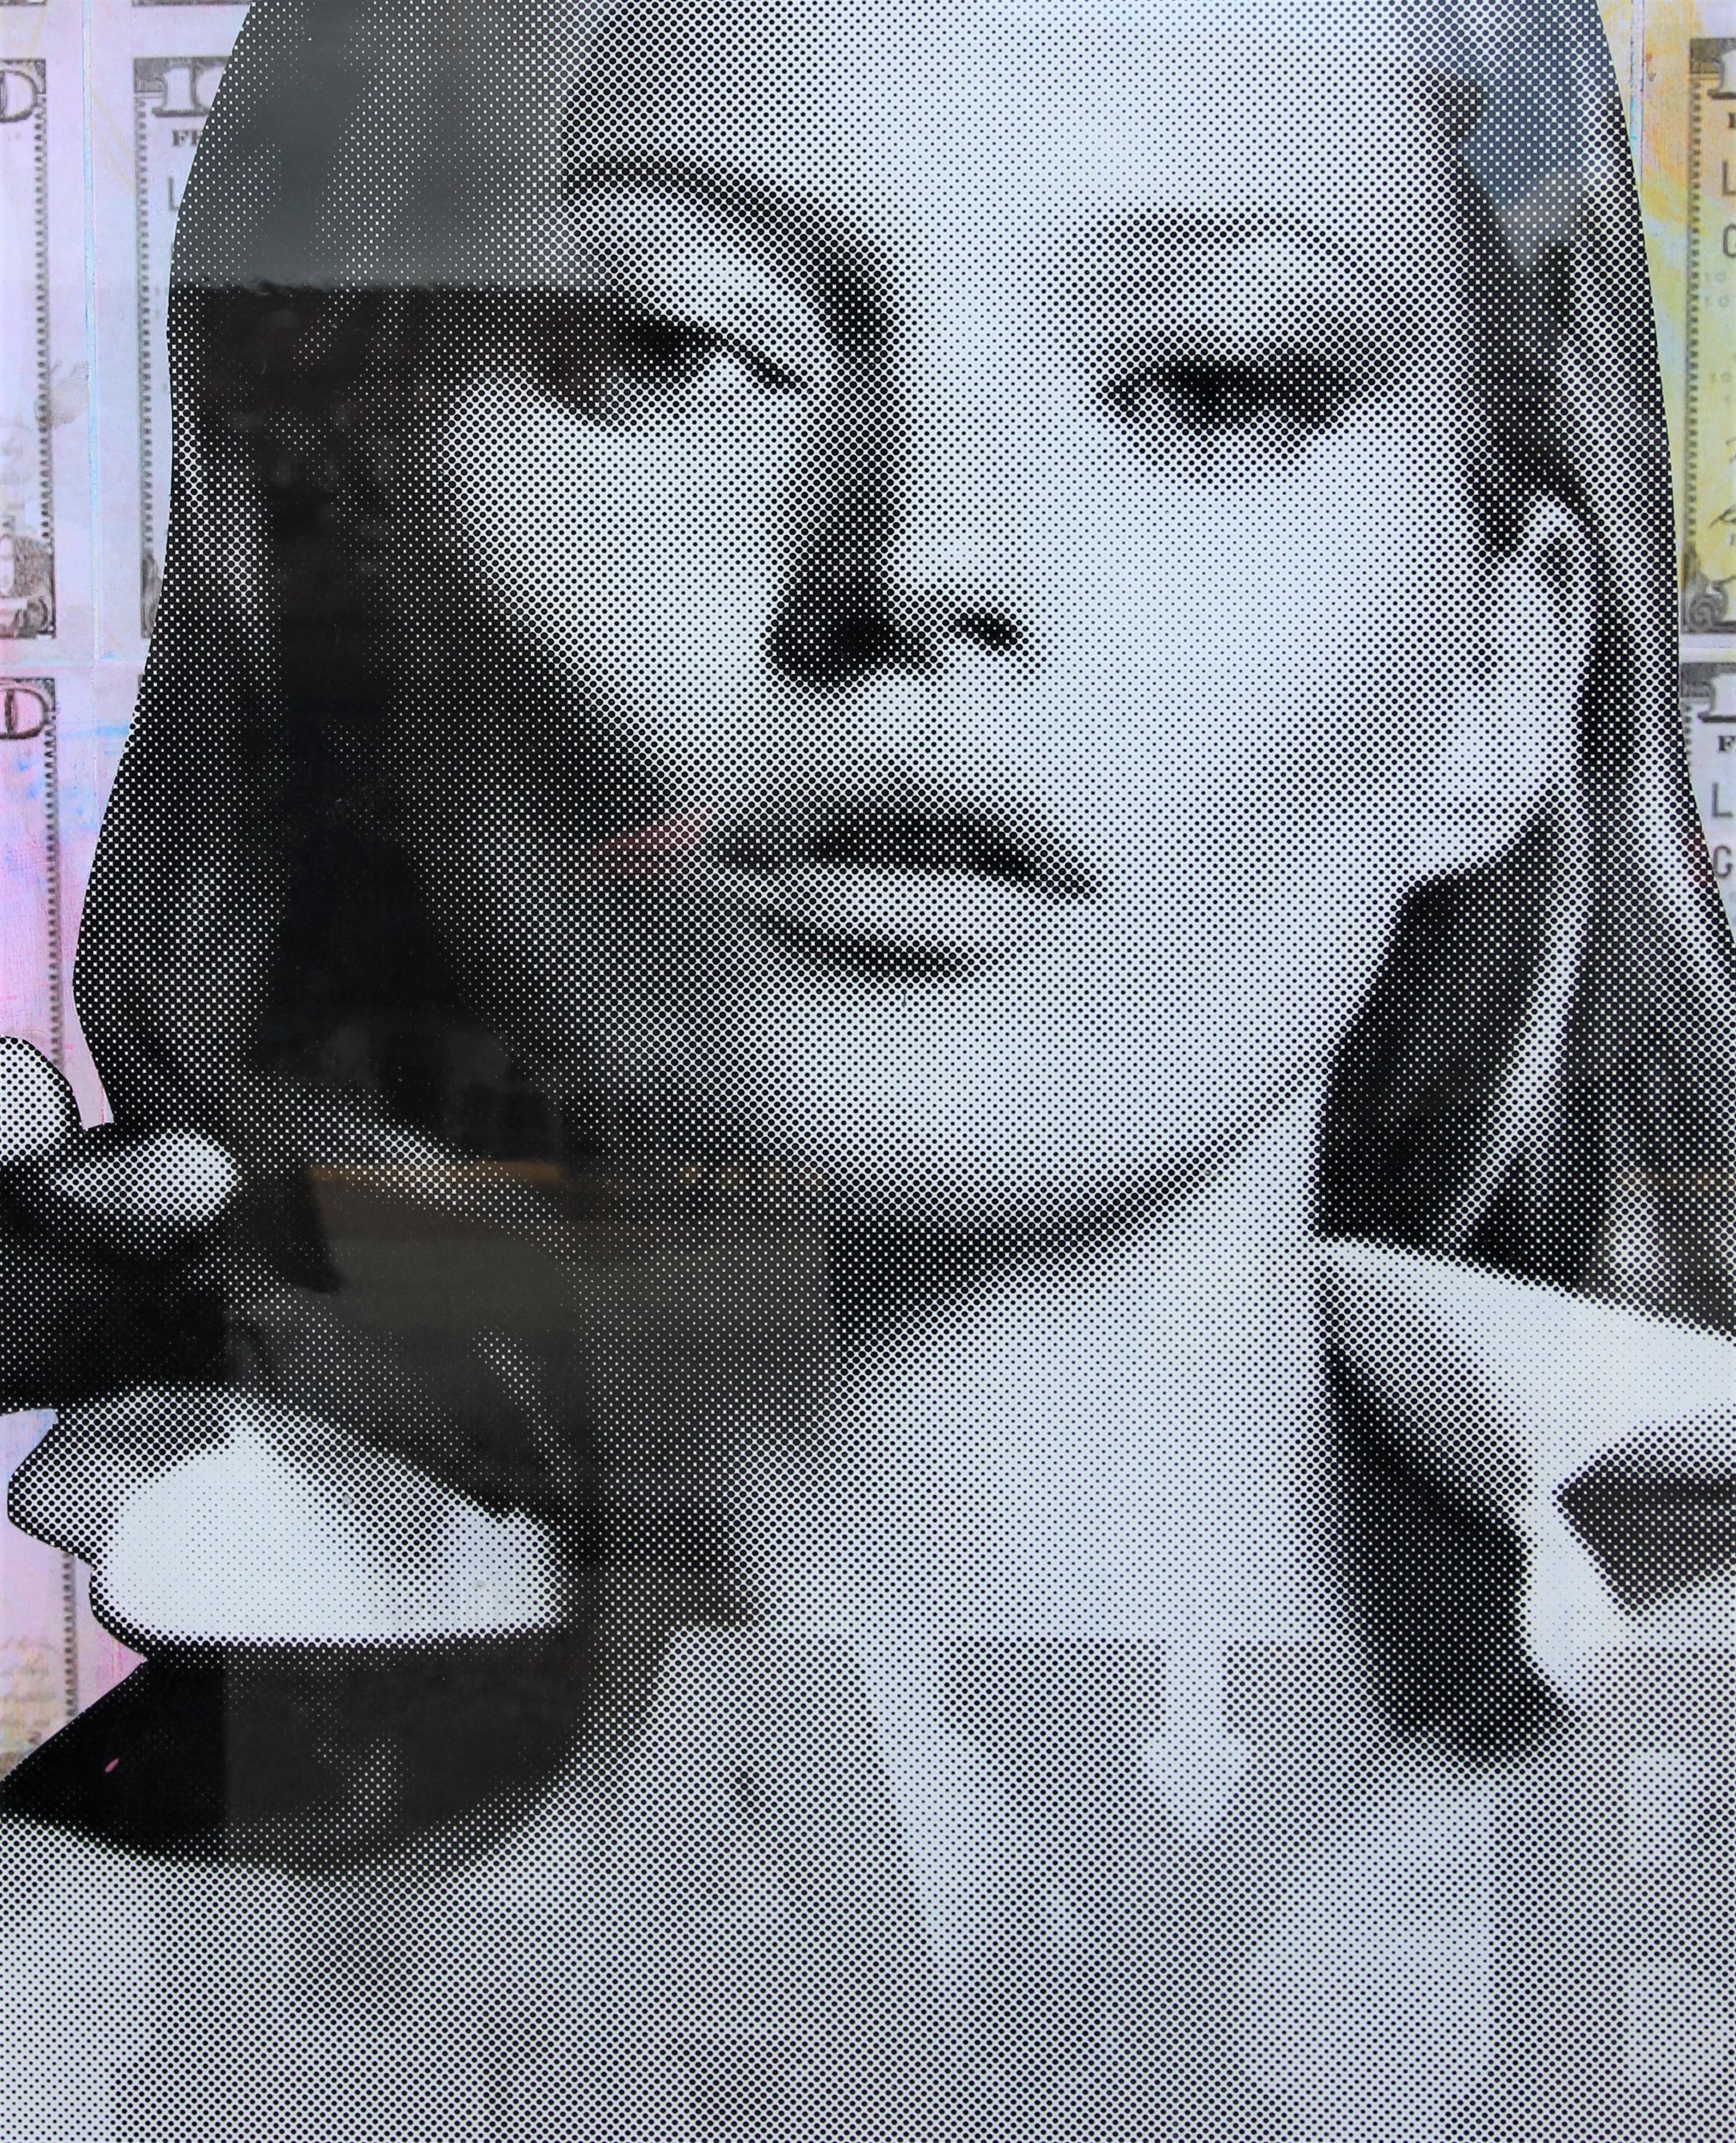 Colorful toned pop art mixed media collage by Houston, Texas artist Jim Hudek. Digitally printed black and white image of Kate Moss in a tuxedo playboy bunny costume against a background of pink, yellow, purple, and blue toned repetitive printed